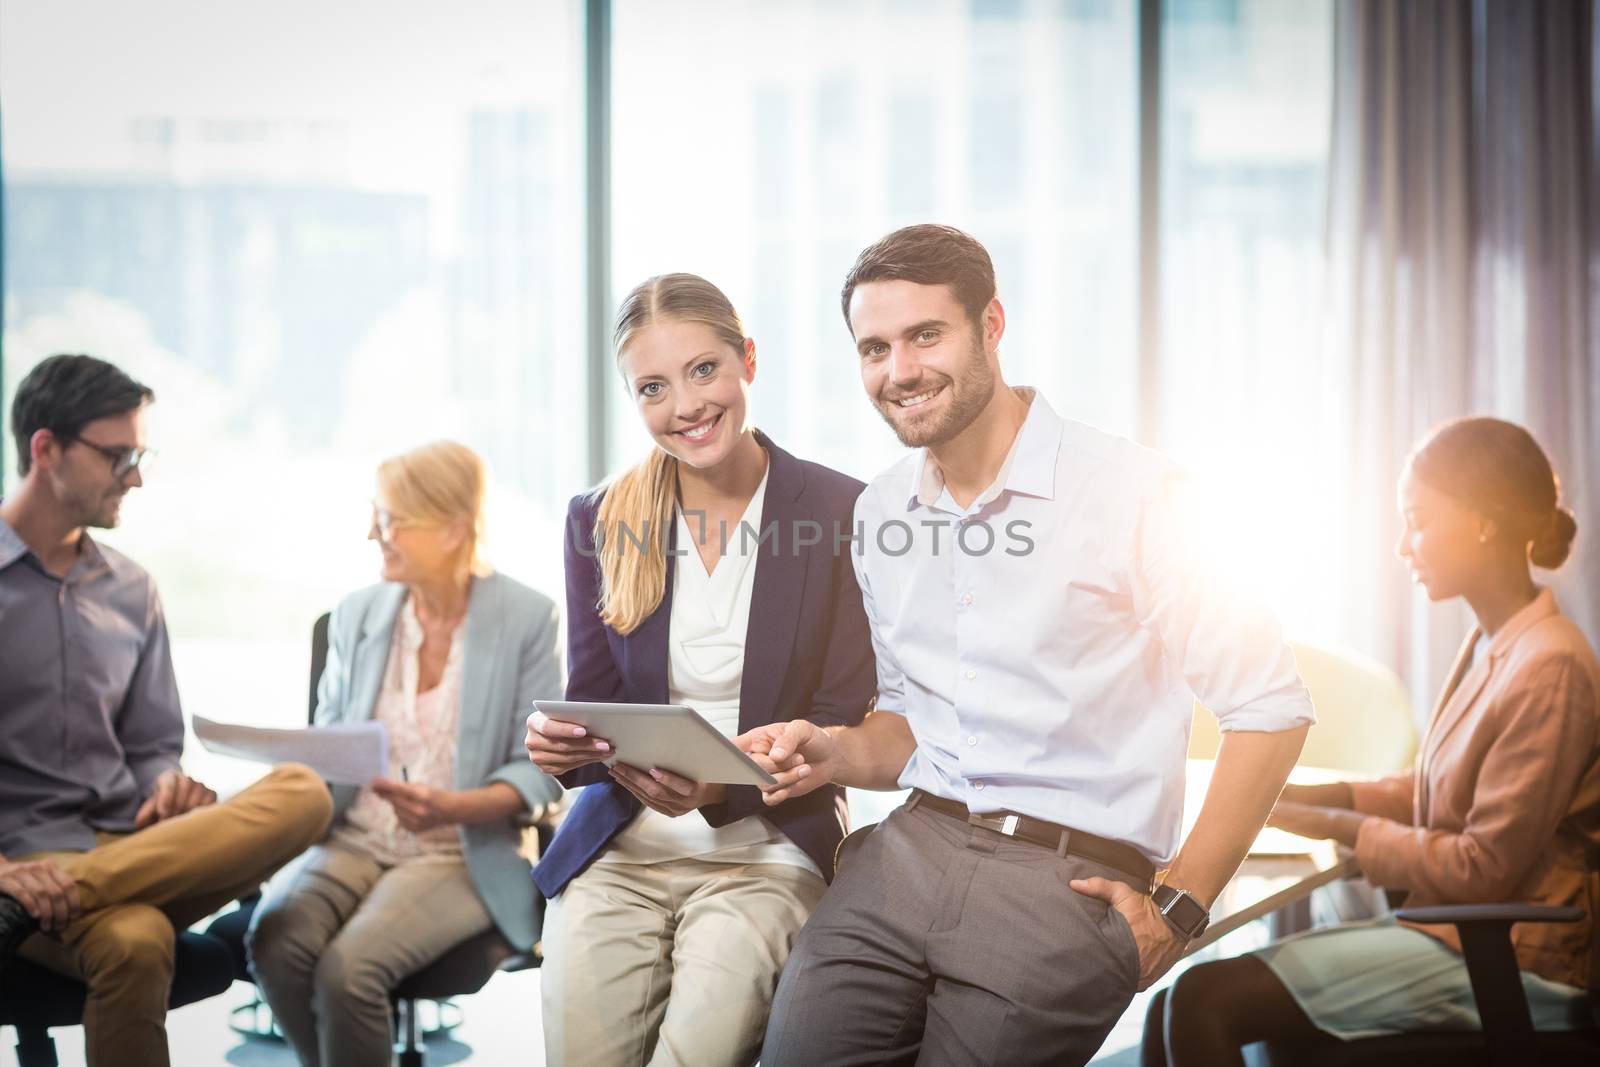 Business people interacting with each other by Wavebreakmedia